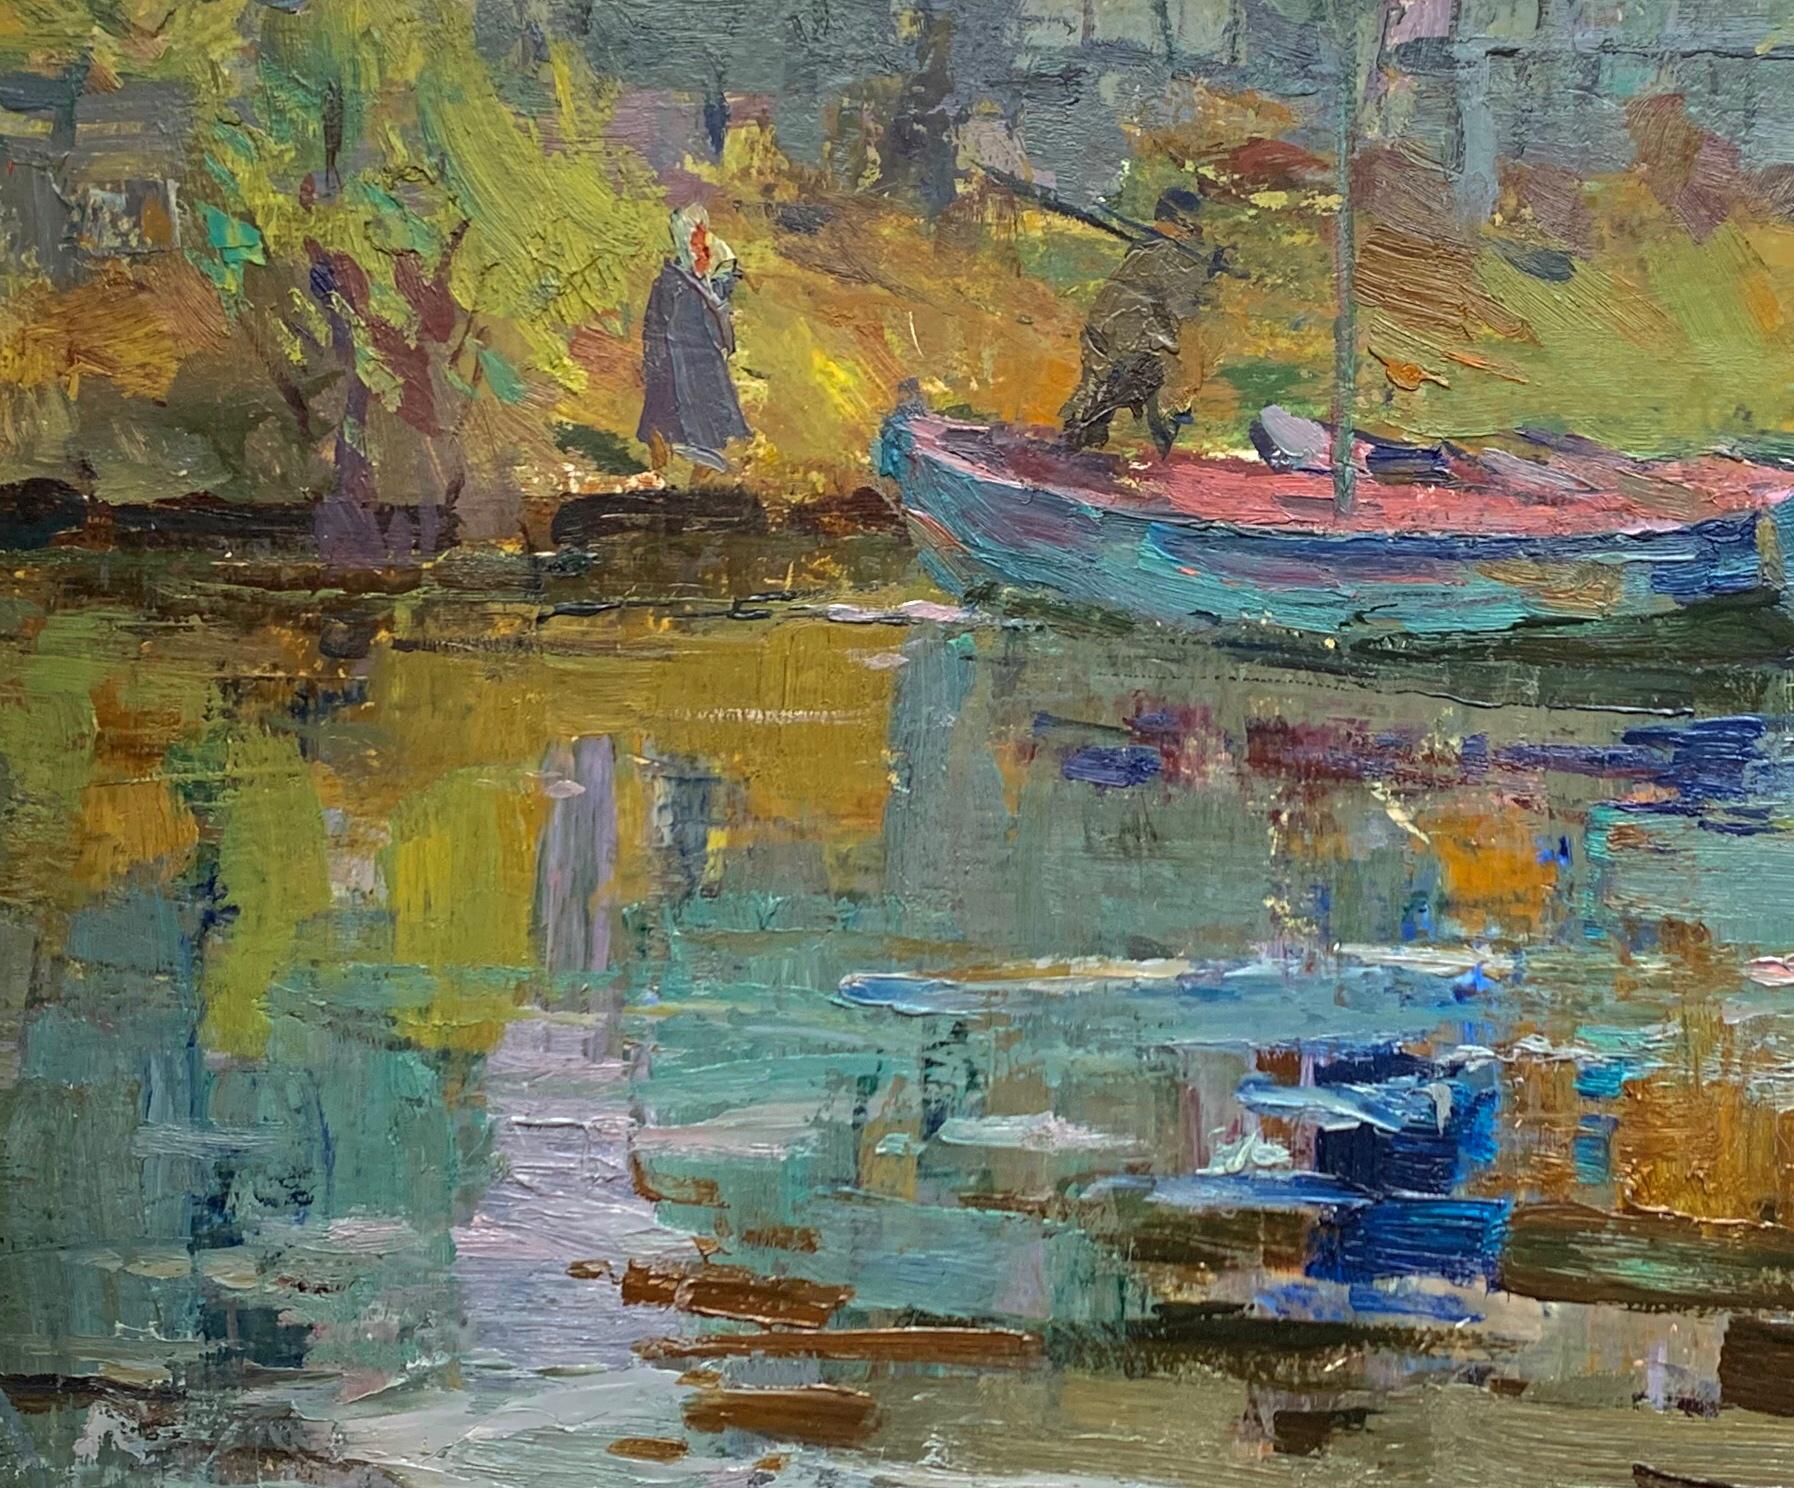 River Landscape Antique Oil Painting Midcentury Boats Scene Art by Shkurko A - Gray Landscape Painting by Shkurko Anatoly